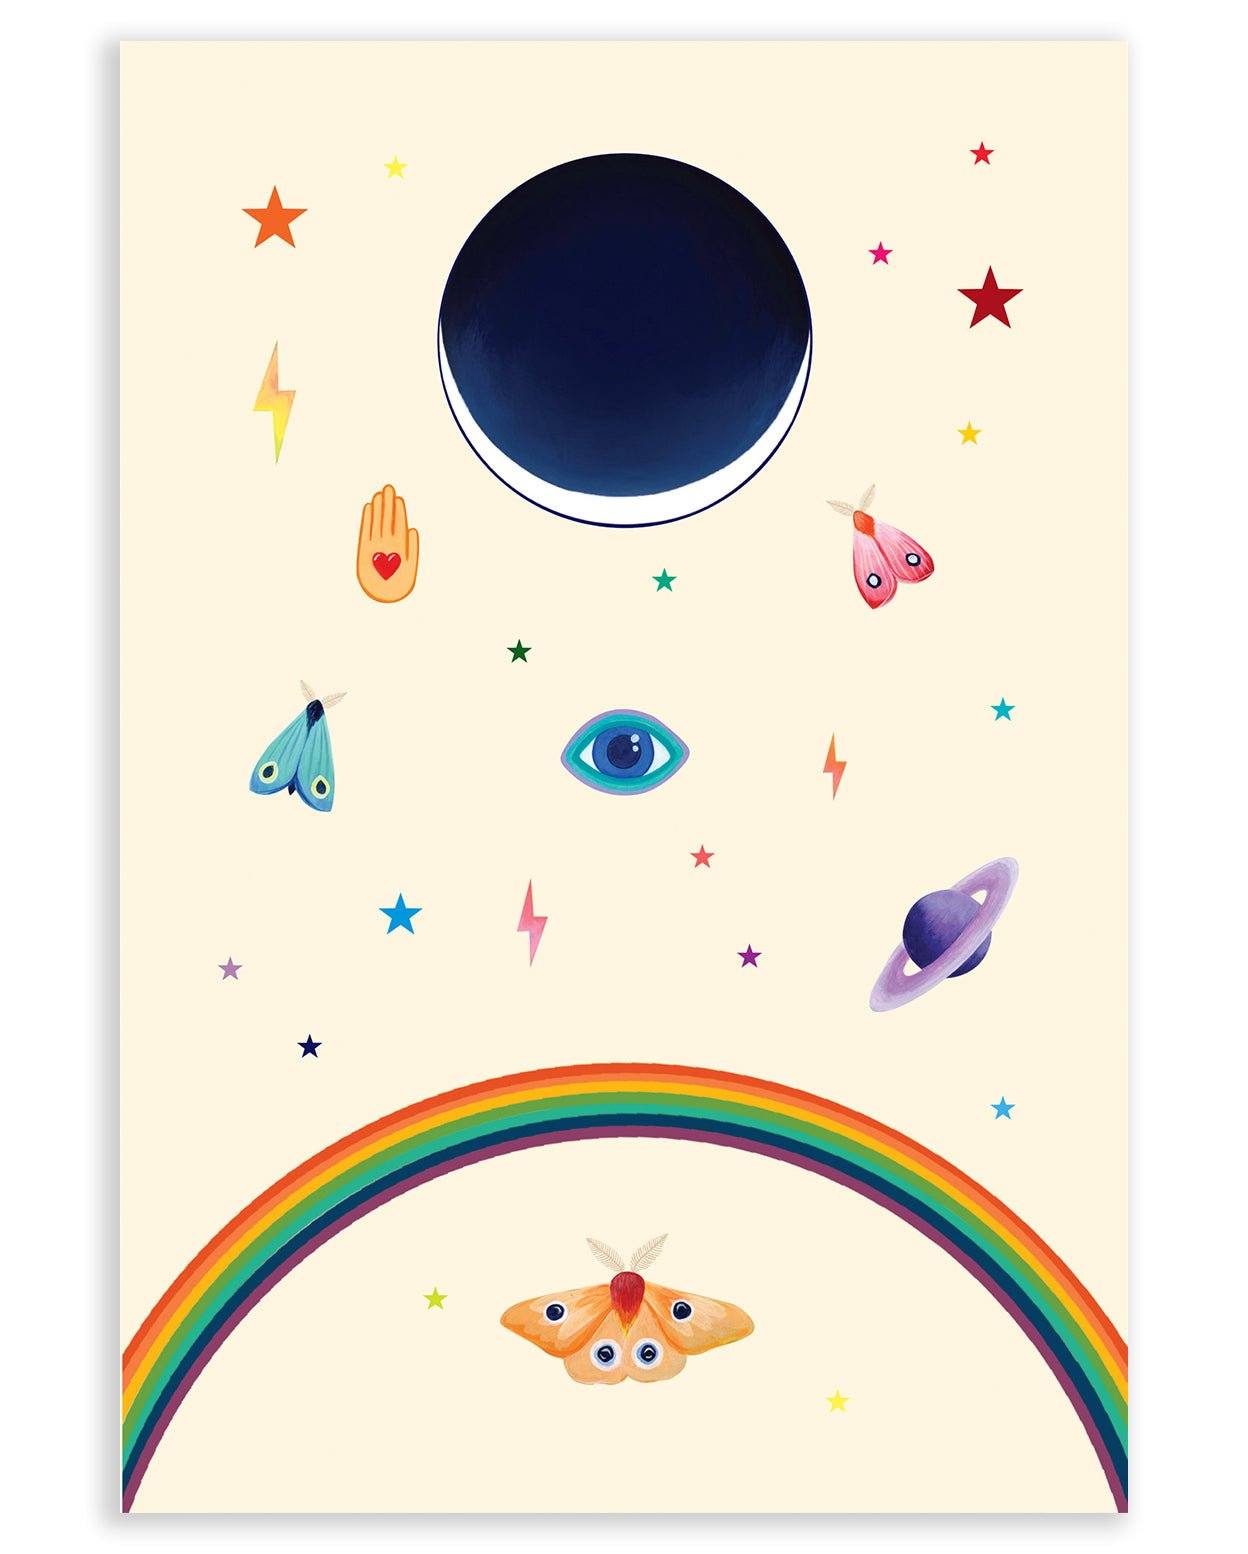 A cream colored card containing an eclipse centerpiece with varying stars, an evil eye, Saturn, moths, lightning bolts, a hand with a heart, and a rainbow printed on cardstock against a white background.